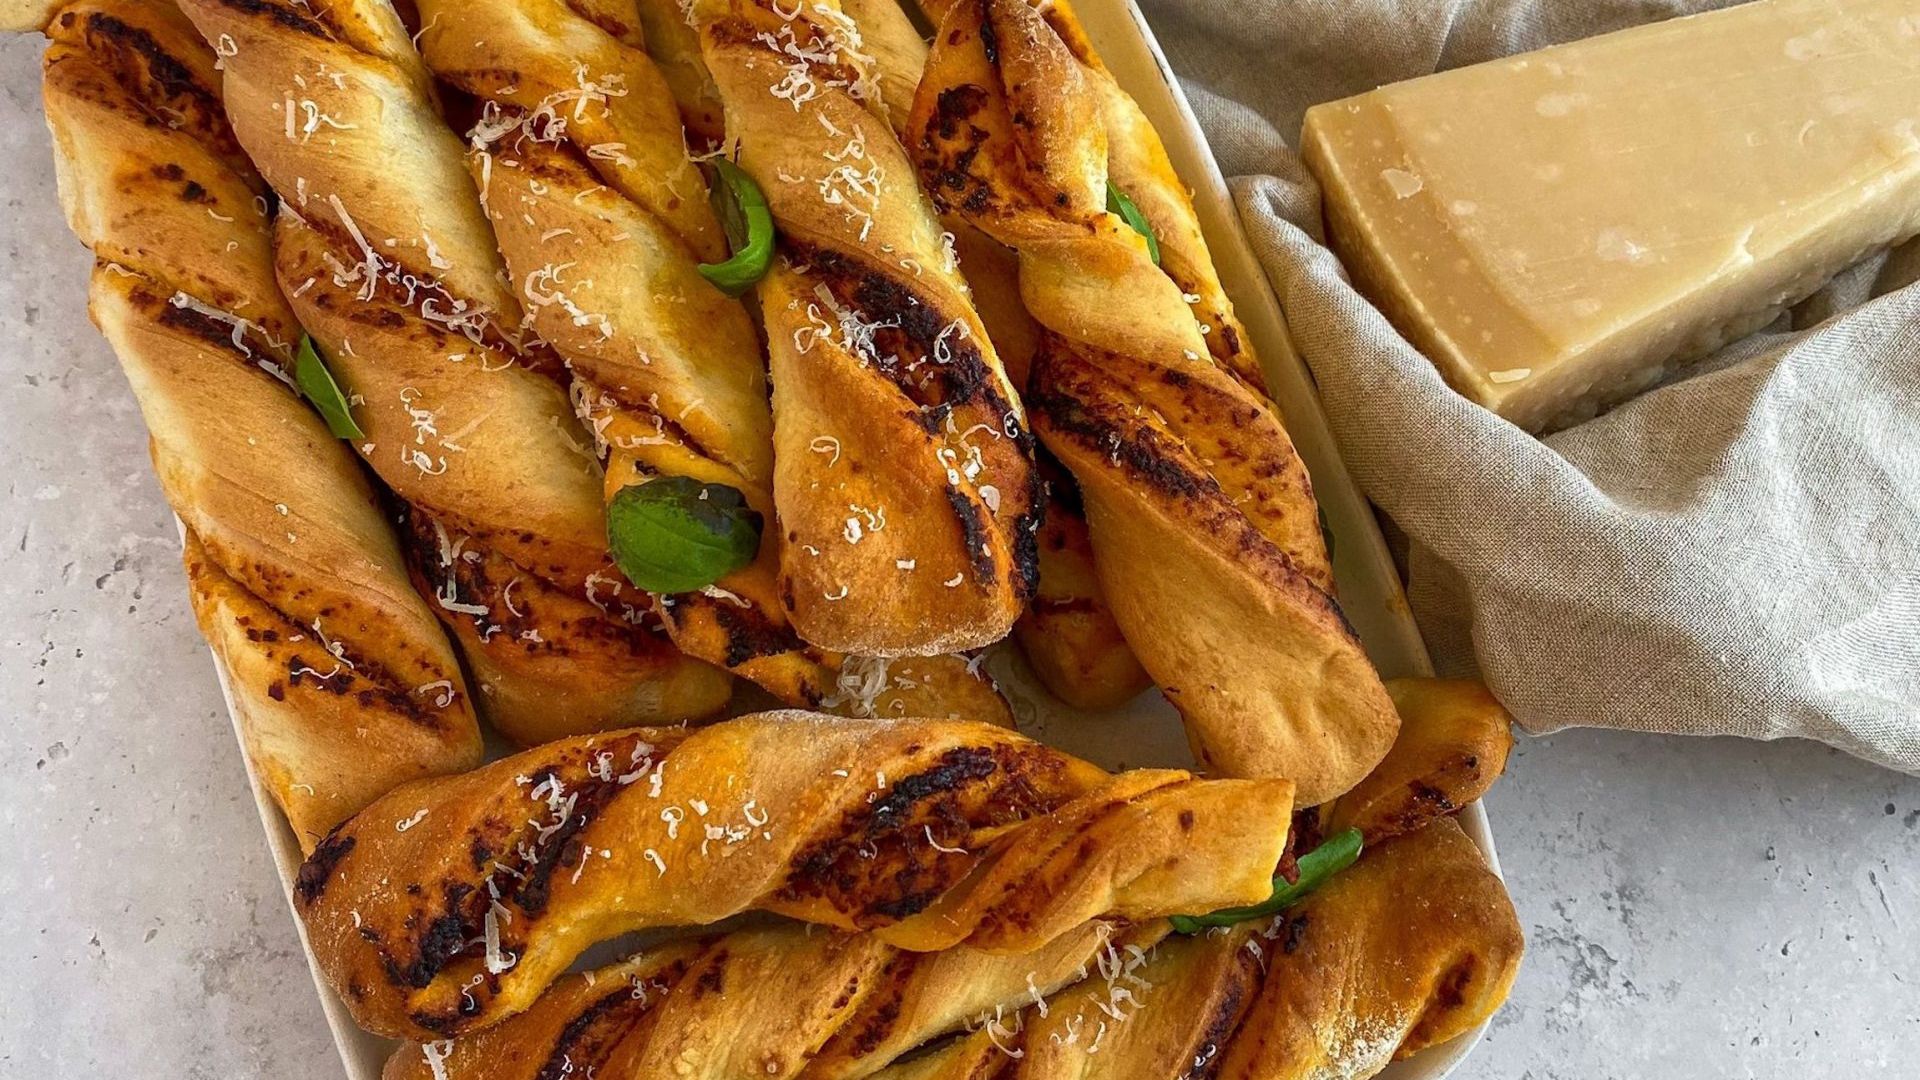 Boost gut health with these pesto and parmesan dough twists